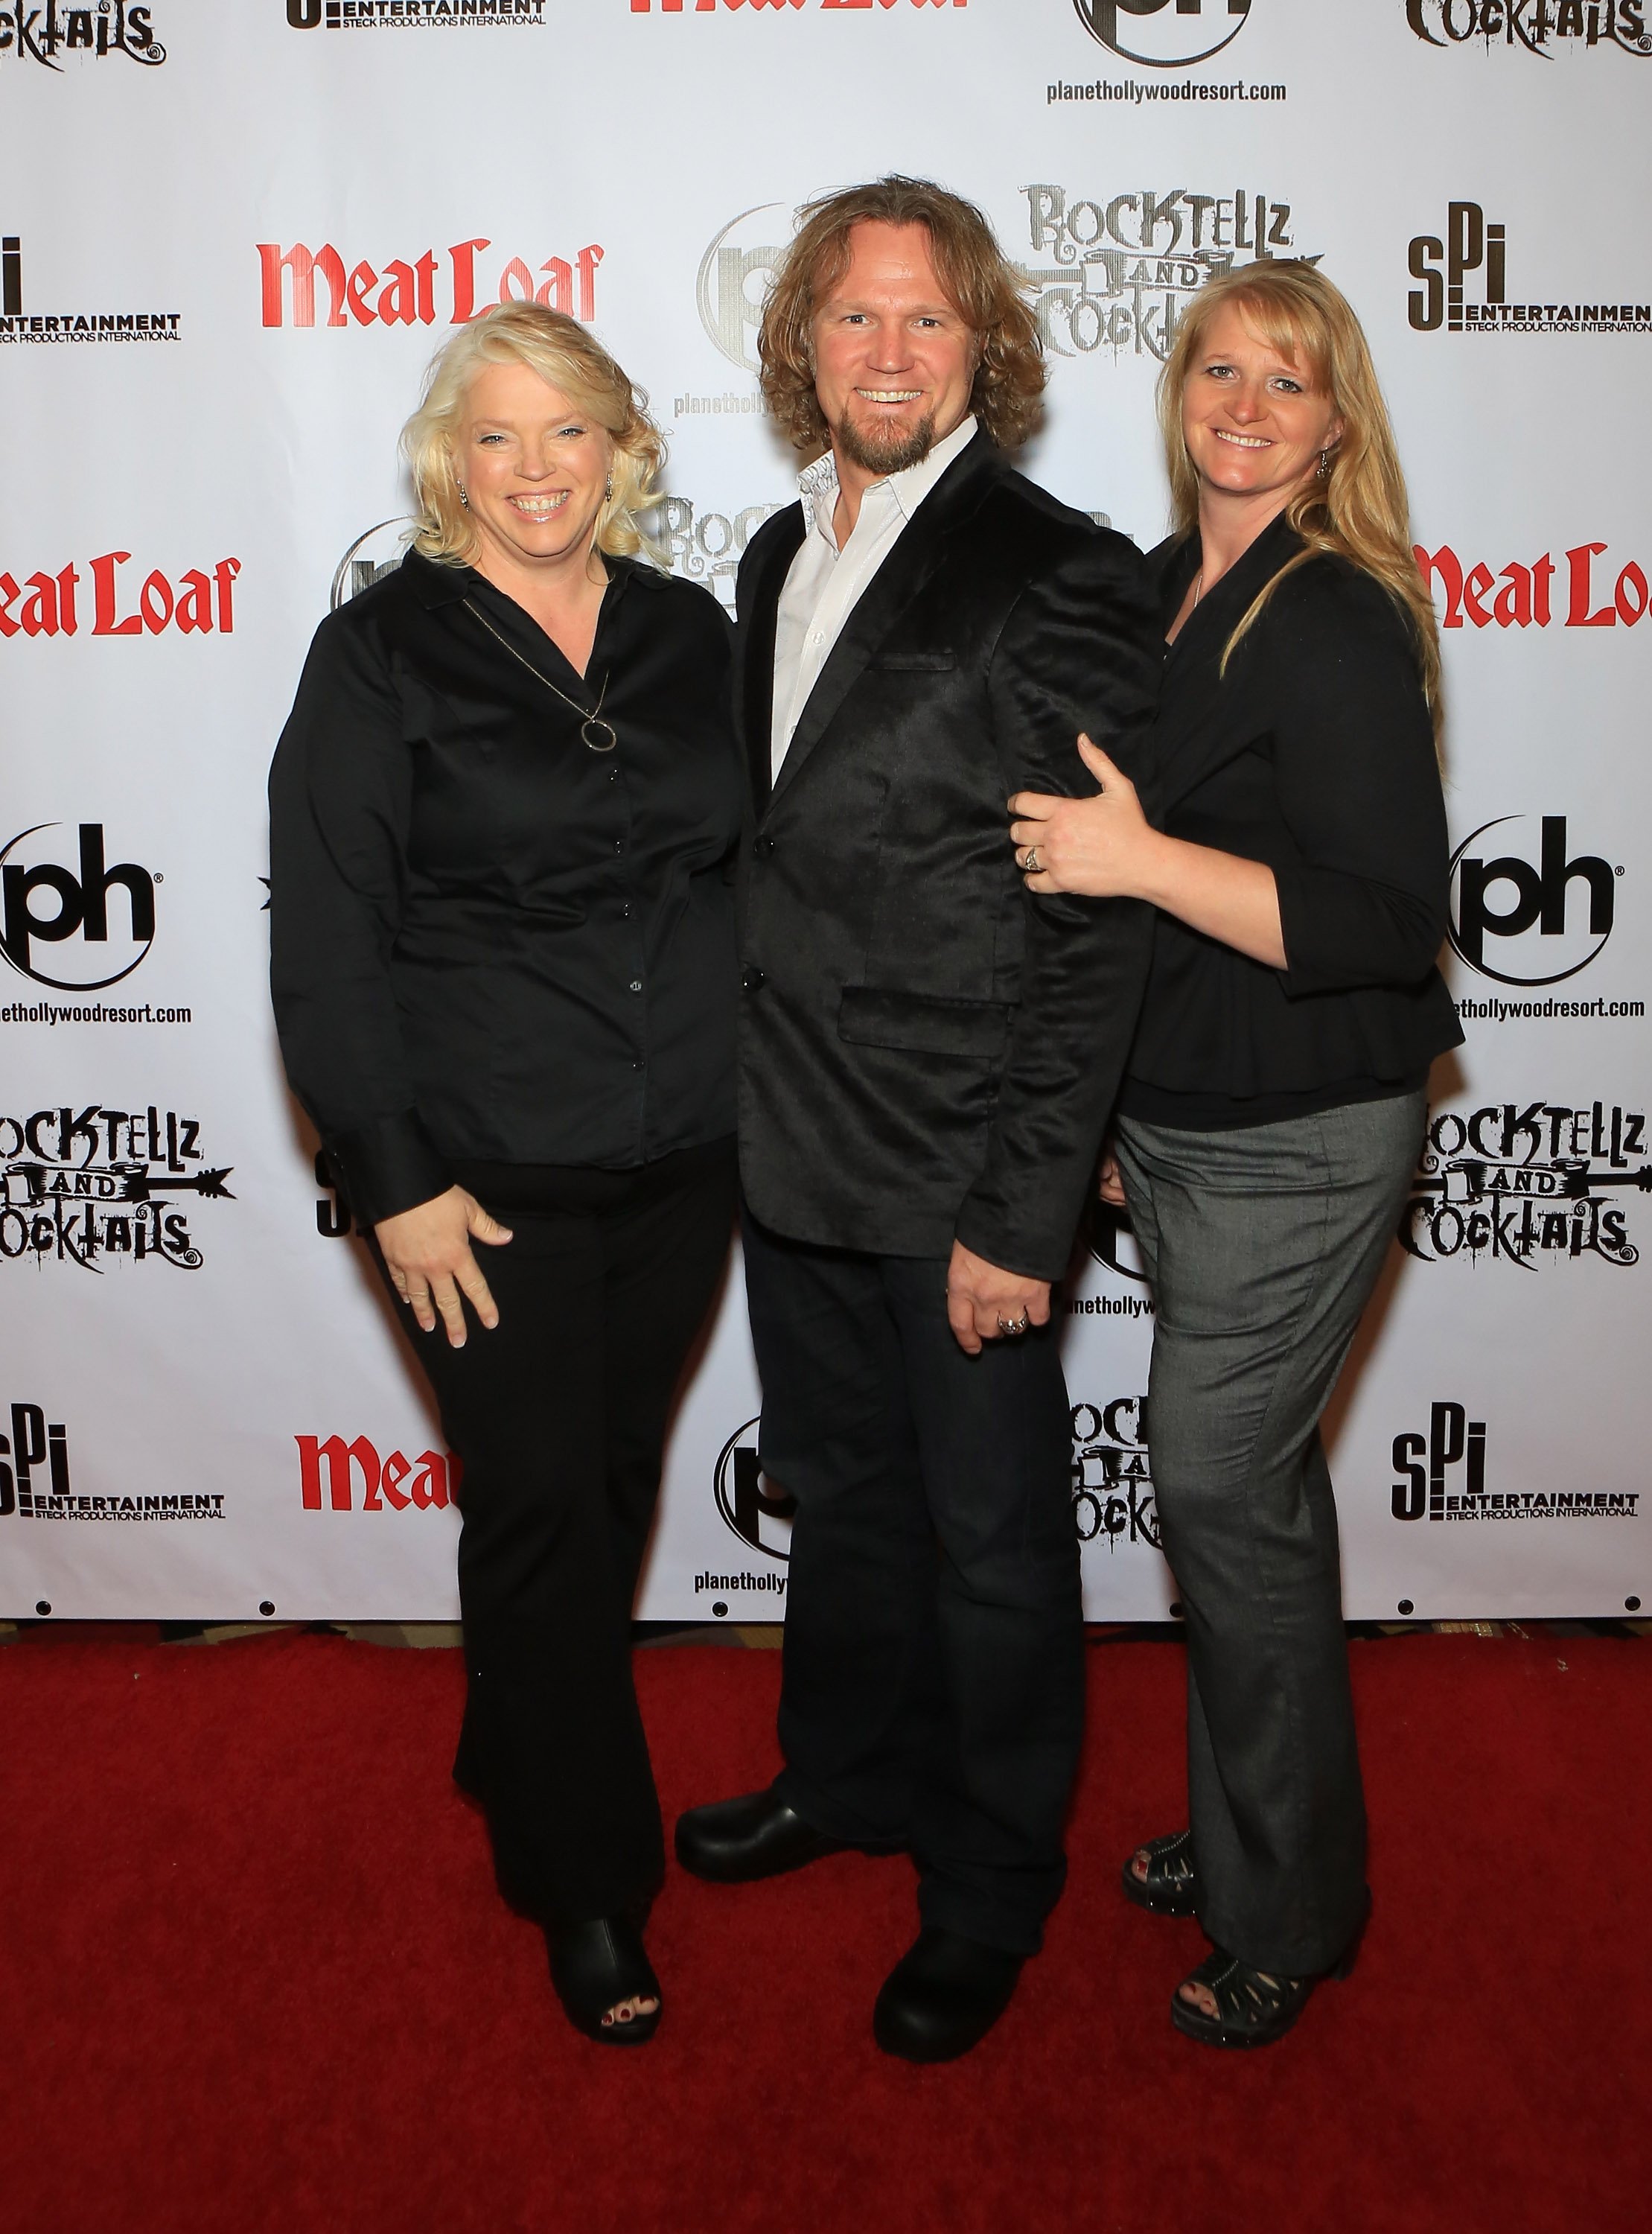 Janelle Brown, Kody Brown and Christine Brown from "Sister Wives" arrive at the show "RockTellz & CockTails presents Meat Loaf" at Planet Hollywood Resort & Casino on October 3, 2013 in Las Vegas, Nevada | Source: Getty Images 